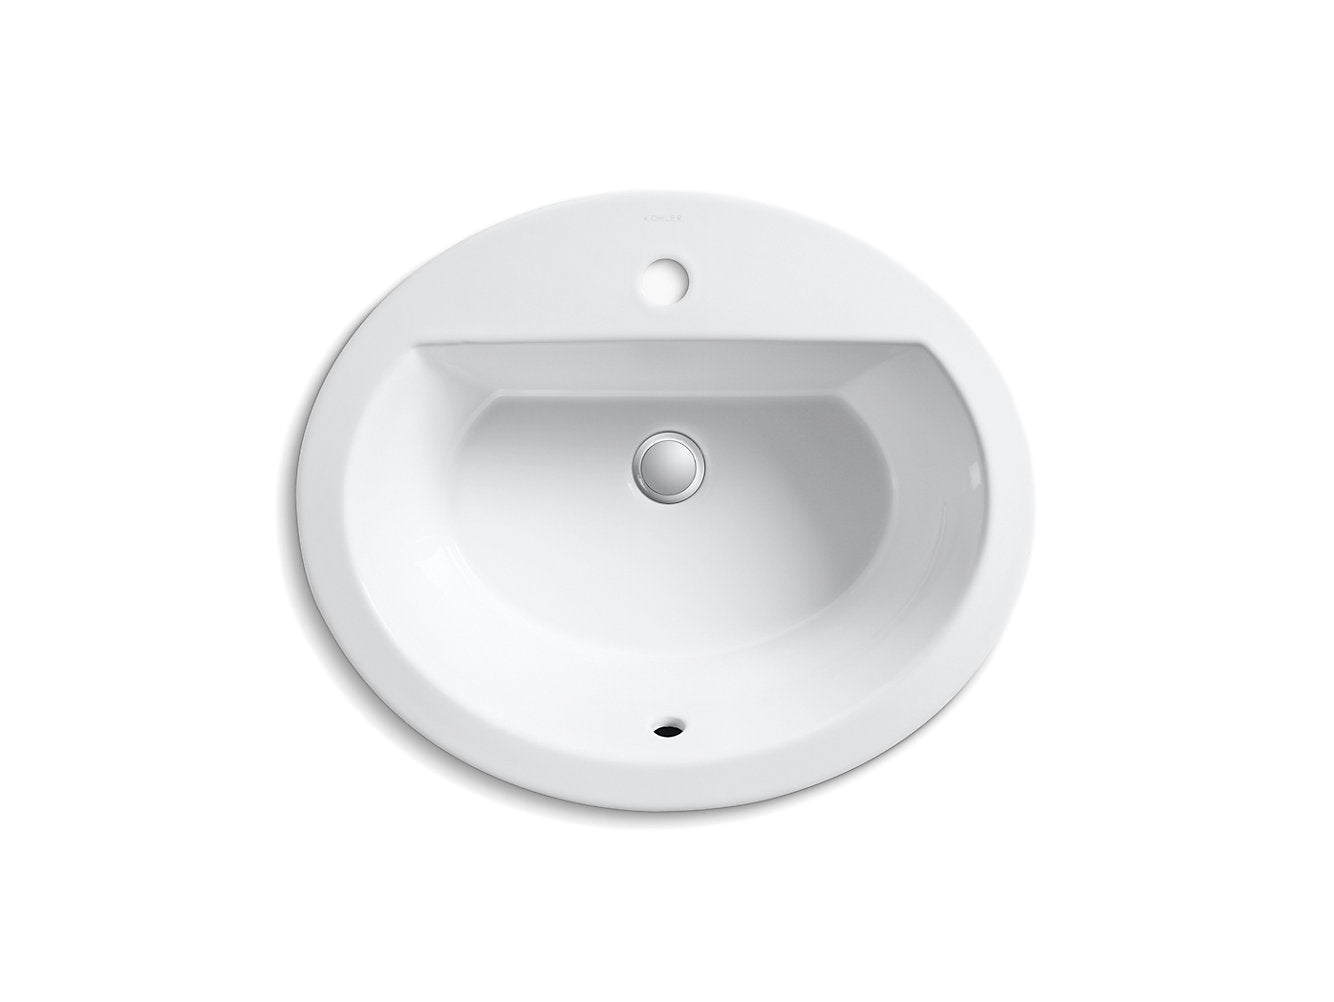 Kohler Bryant 20-1/8" x 16-1/2" Oval Drop-in Bathroom Sink With Single Faucet Hole - White